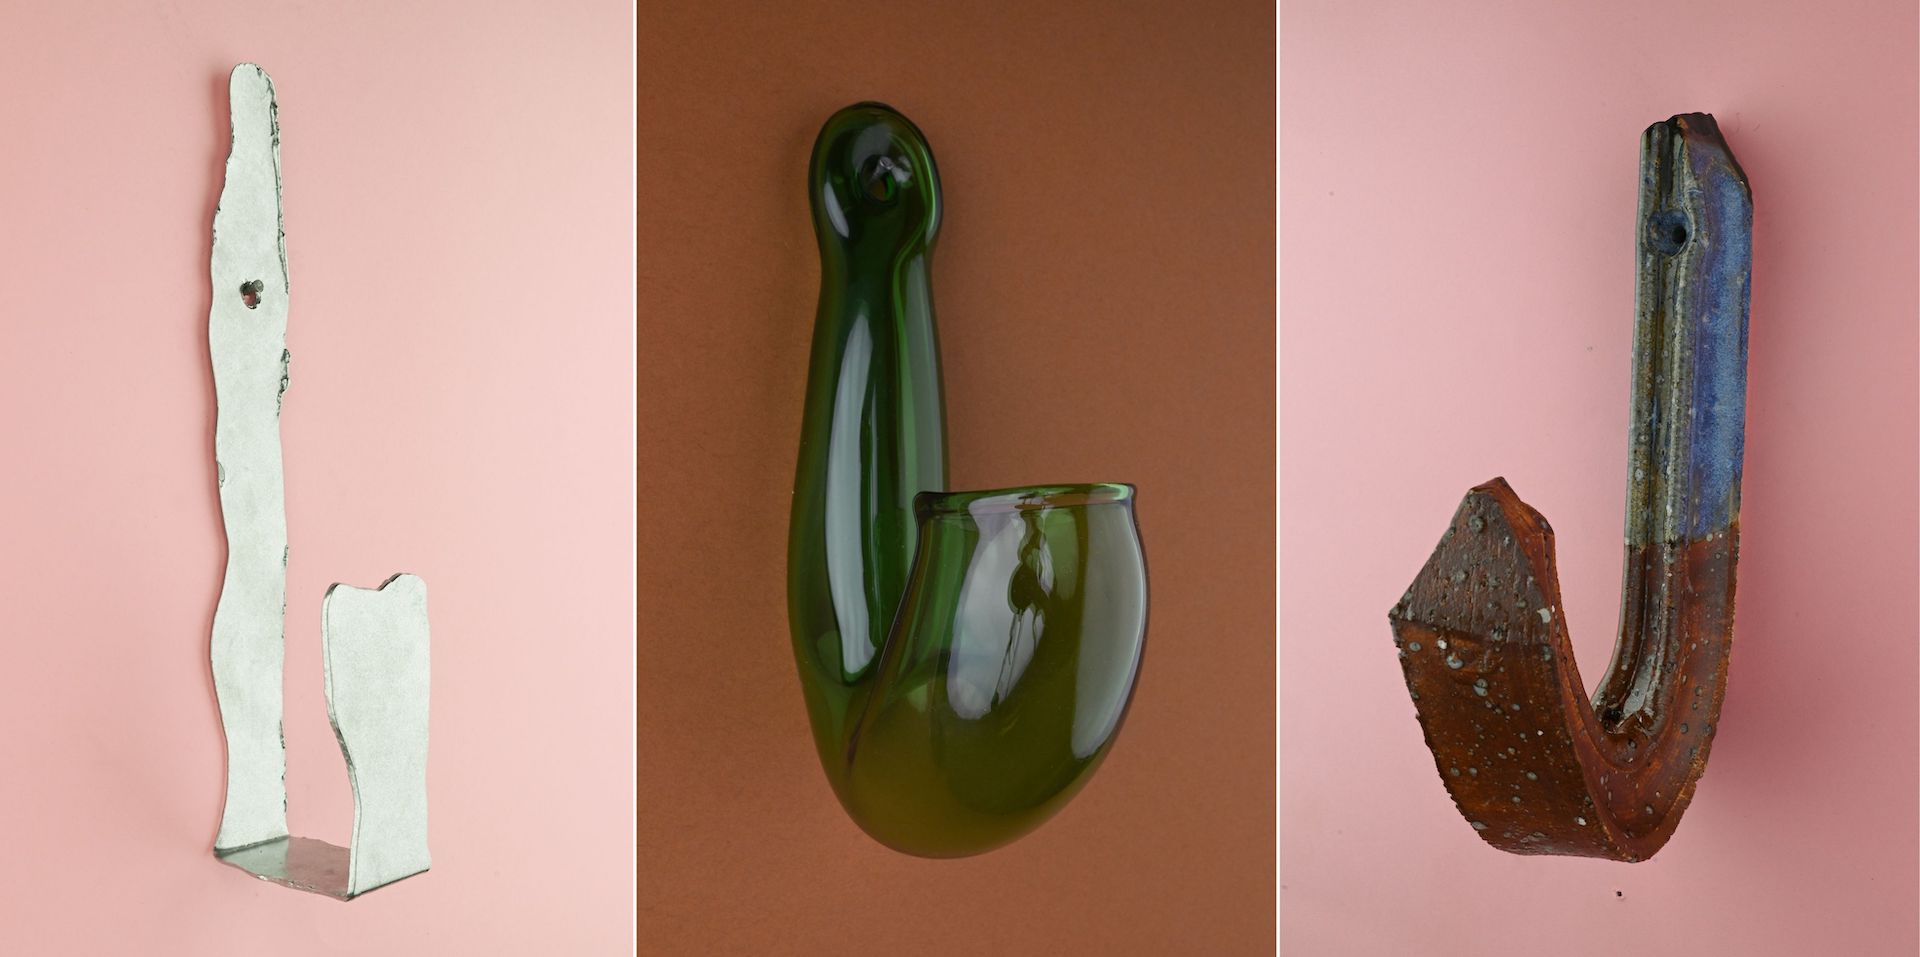 Martino Gamper's Hooks, from left to right: Flame 'n Cut, Hook from Glass, and Fired Hook (2023). © Martino Gamper. Photos © Martino Gamper Studio; courtesy of the artist and Anton Kern Gallery, New York